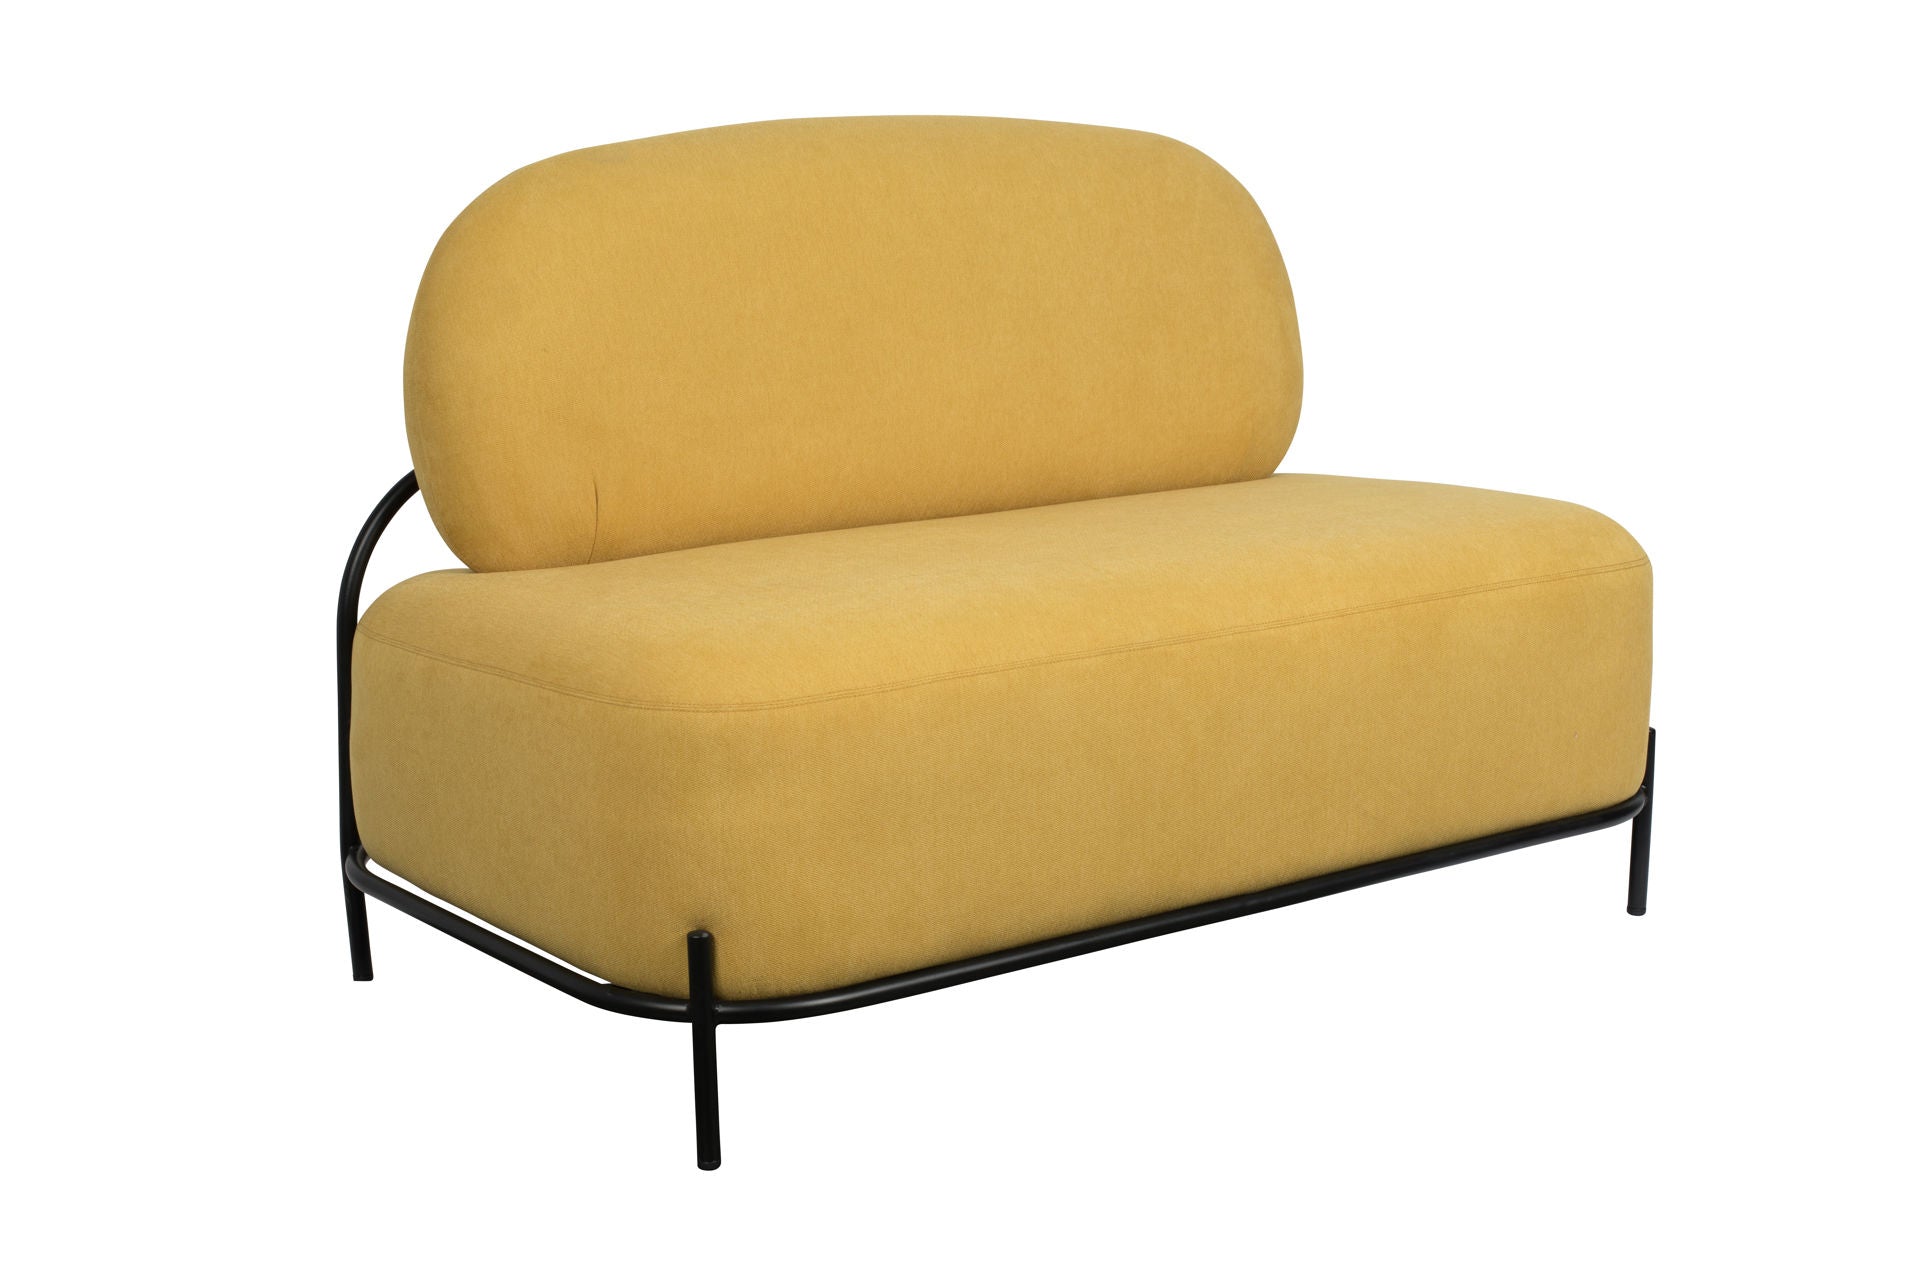 Nancy's Upper Montclair Lounge Chair - Industrial - Yellow - Polyester, Plywood, Iron - 71.5 cm x 125 cm x 77 cm